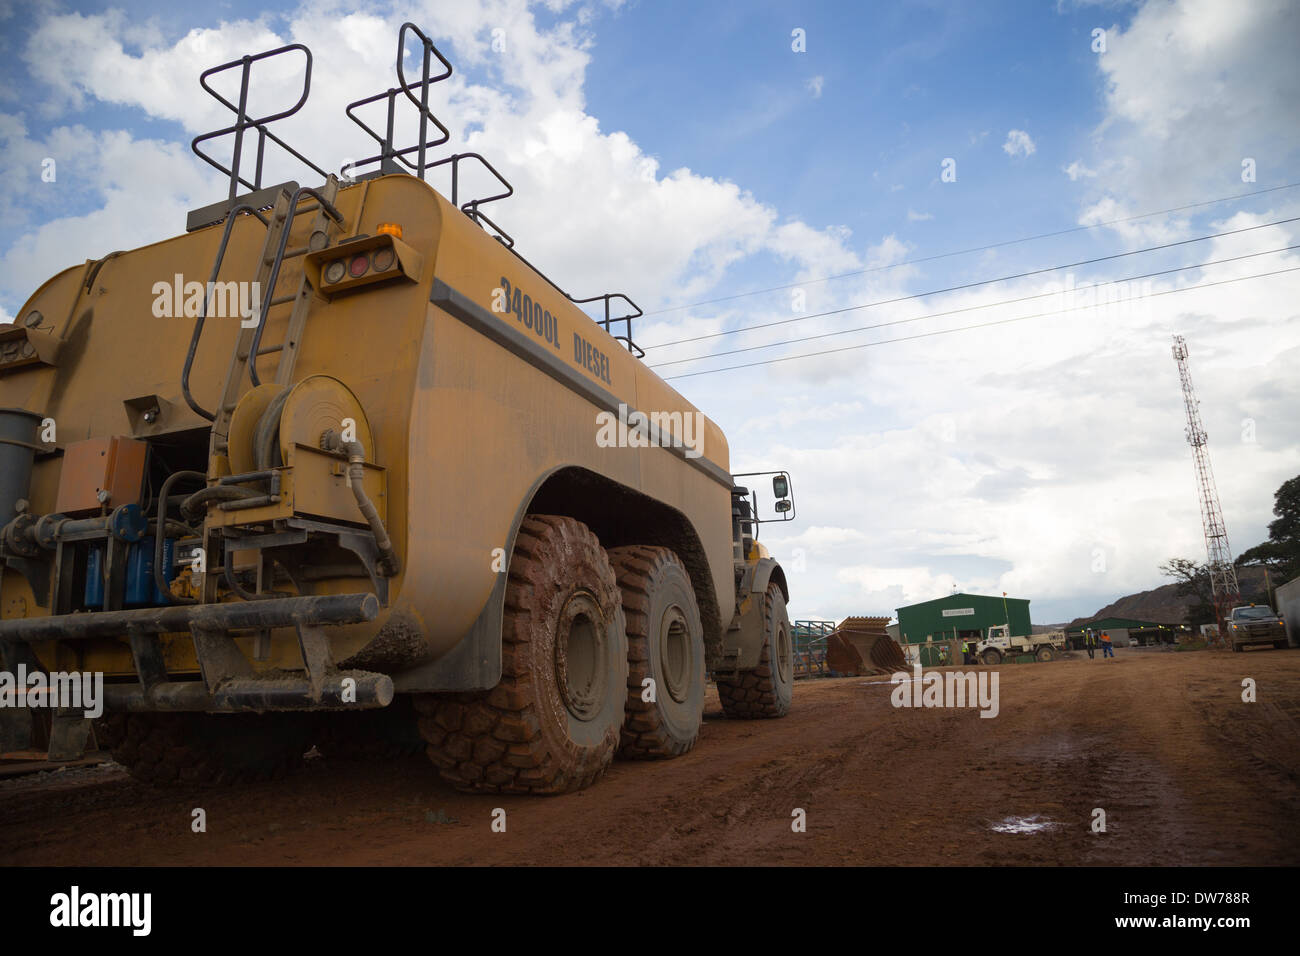 A volvo articulated diesel truck carrying 34,000L of Diesel prepares to refuel in a large open cast copper/  gold mine in Zambia Stock Photo